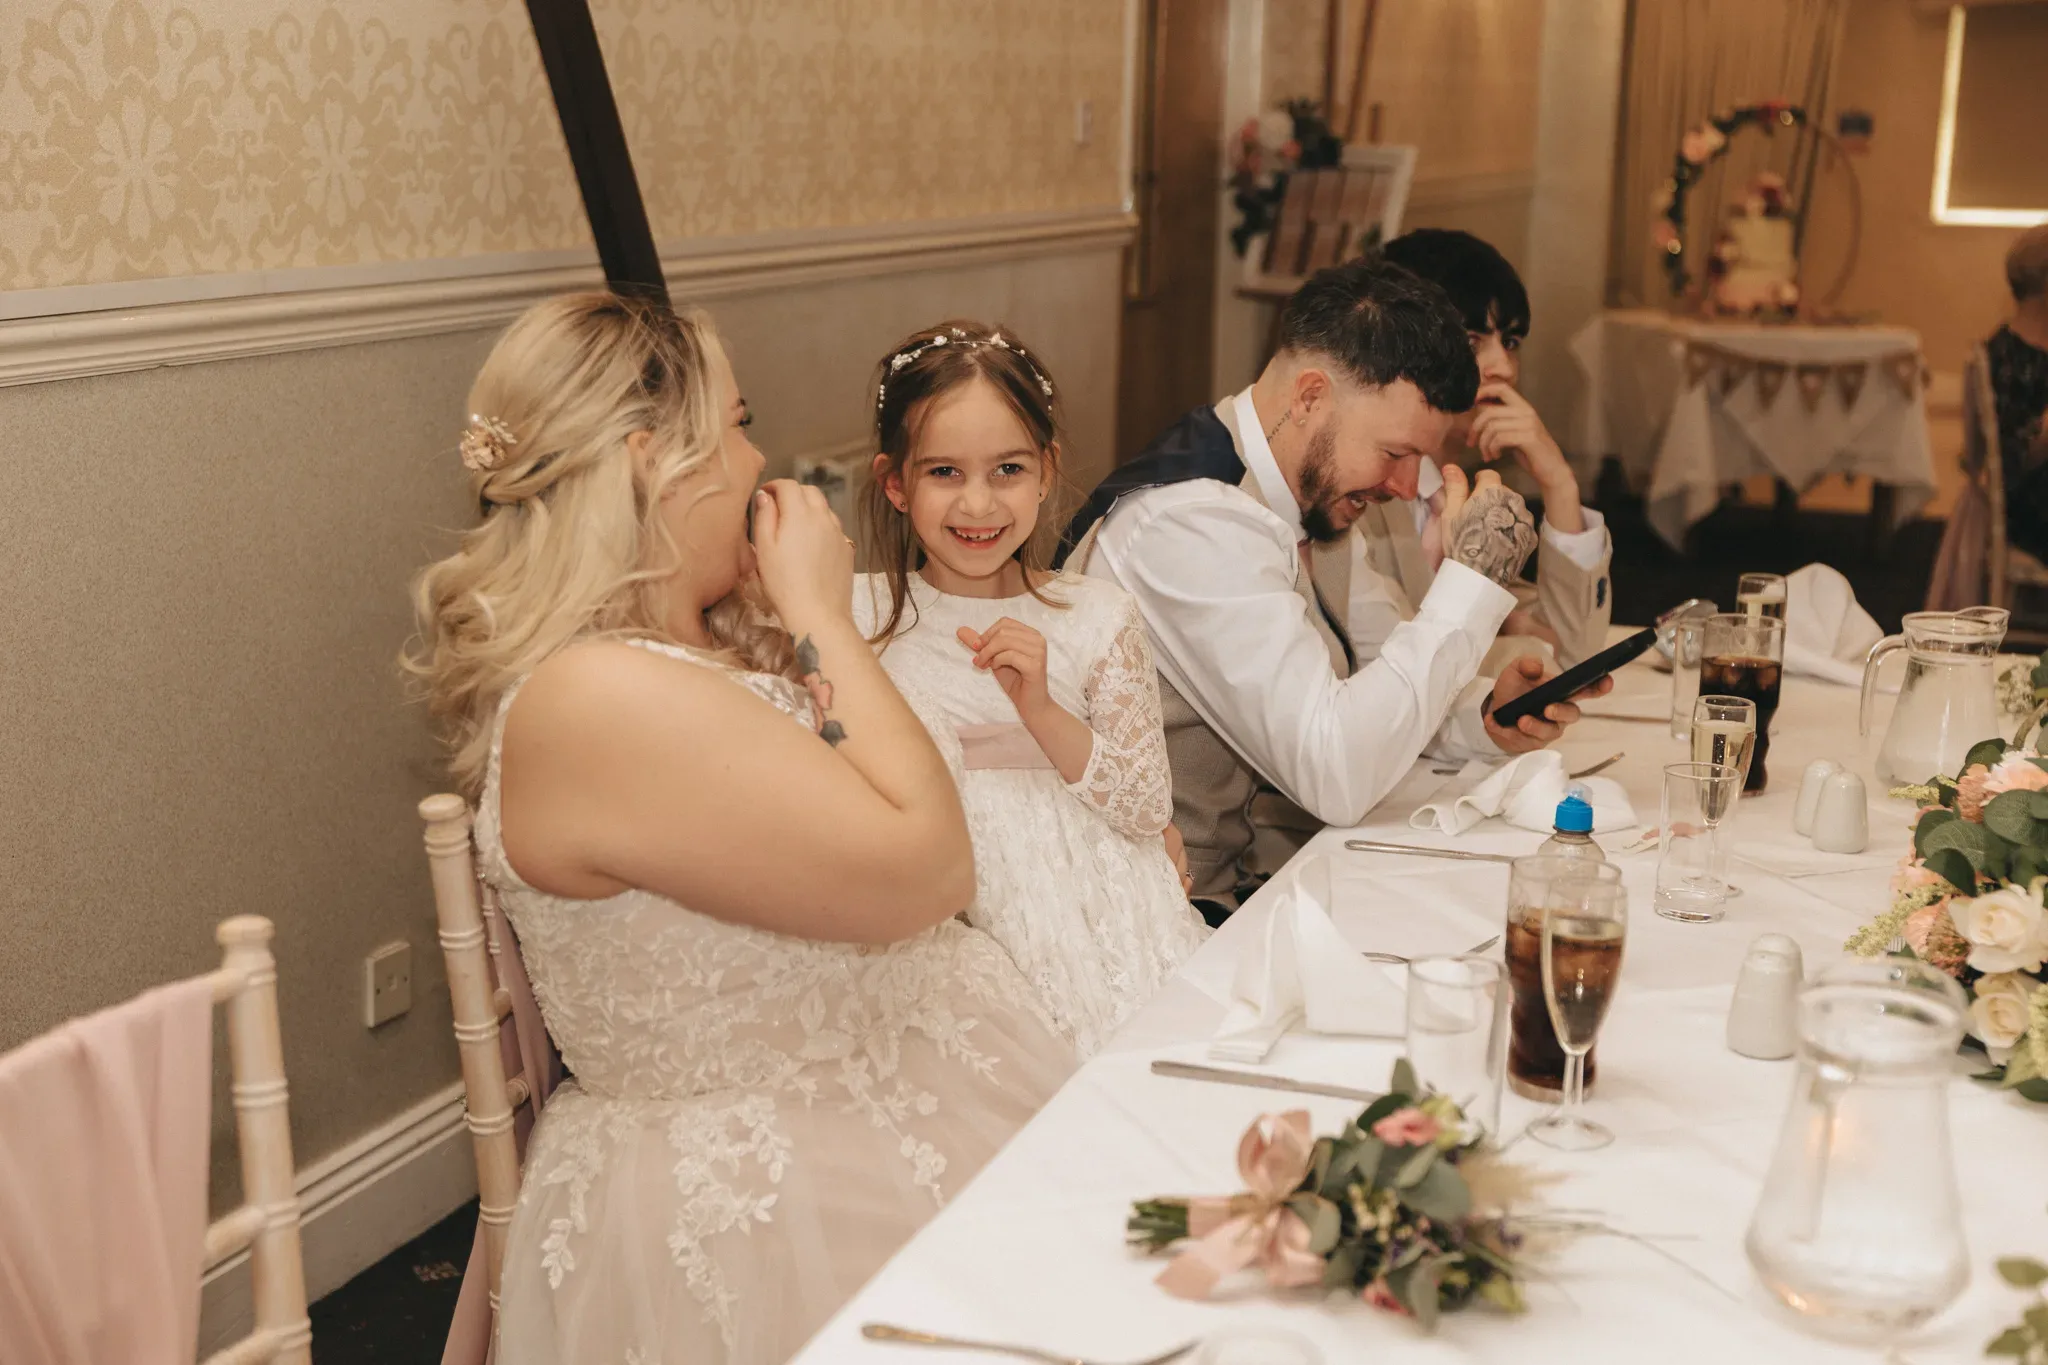 A joyful wedding reception scene with a young girl smiling broadly between two adults, a bride and a man likely checking his phone. they're seated at a table adorned with floral arrangements.